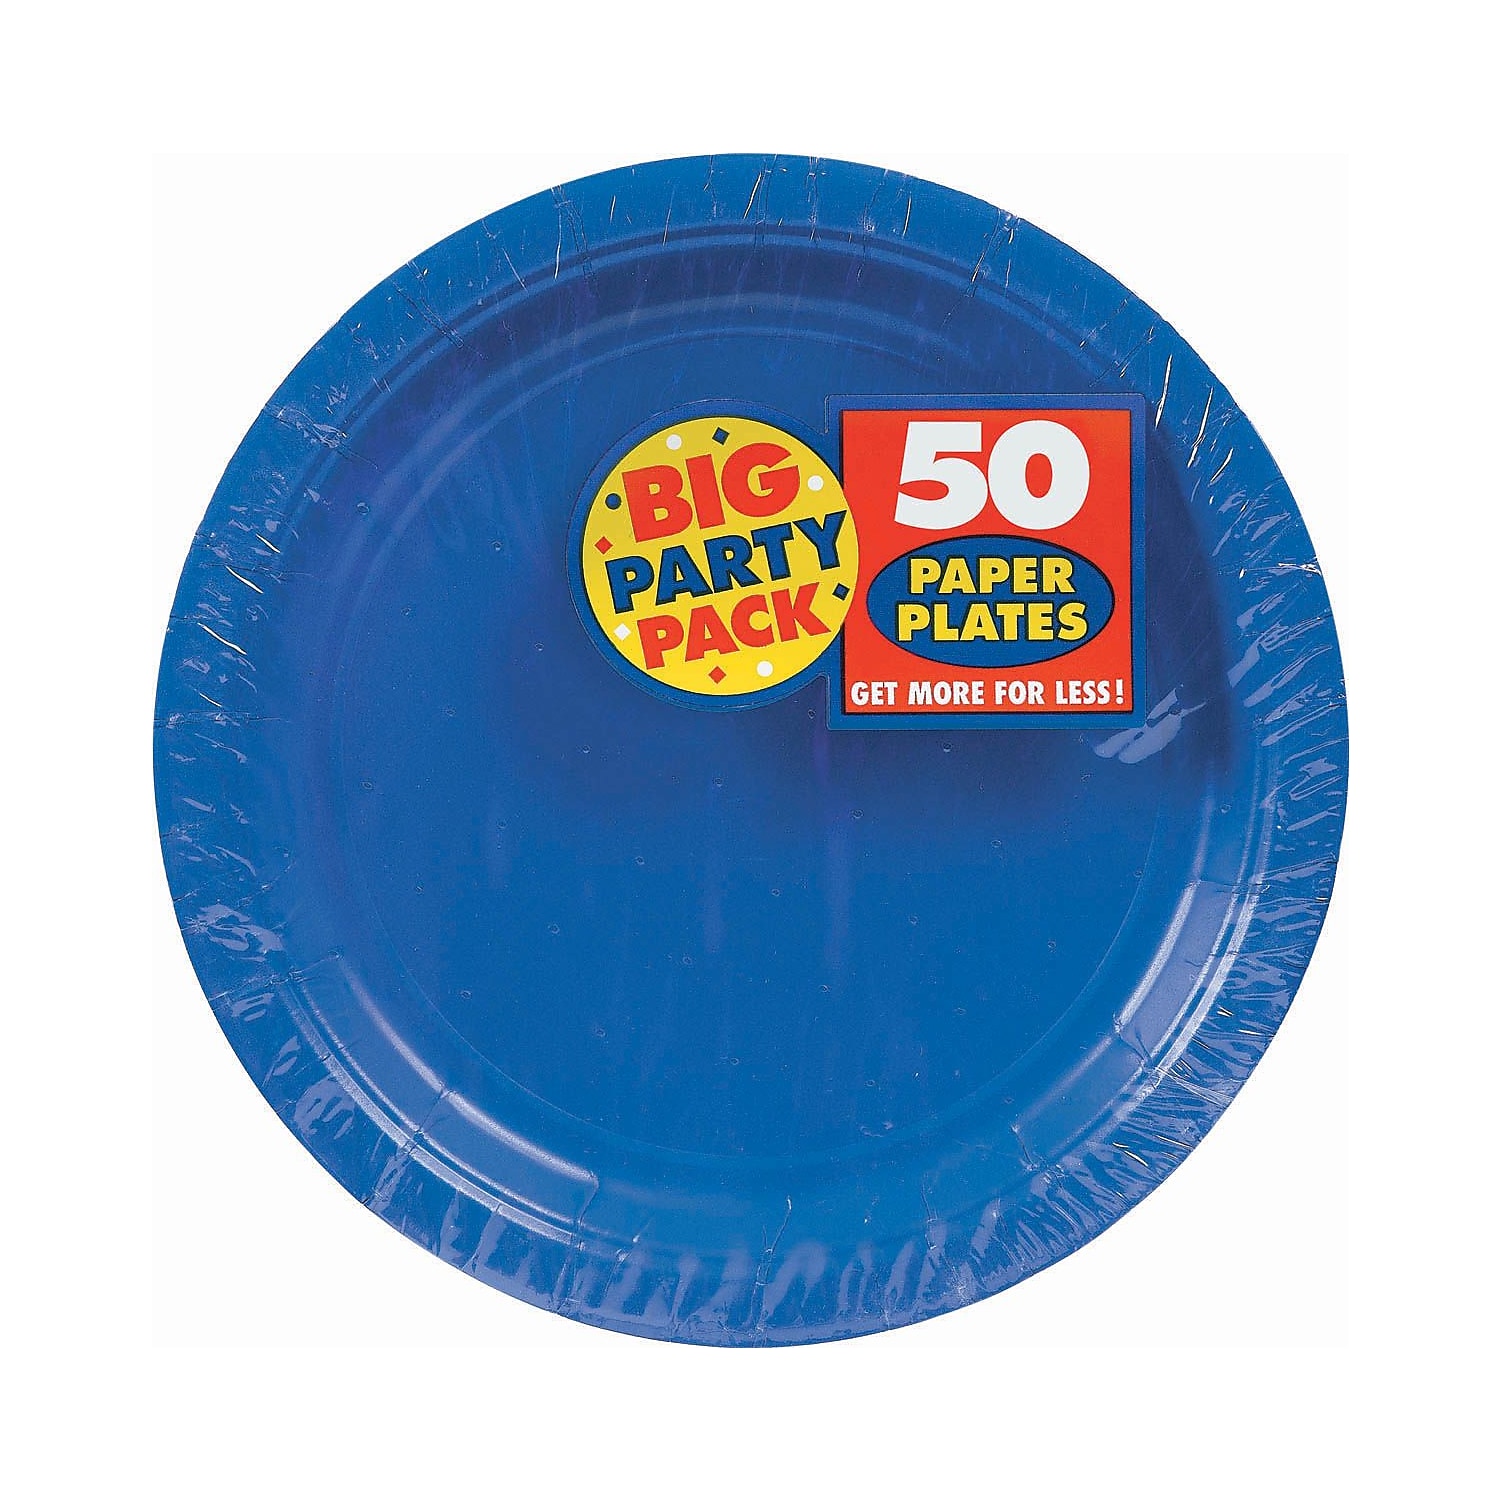 9" Paper Lunch Plates, Bright Rotal Blue, 50 ct - image 1 of 2